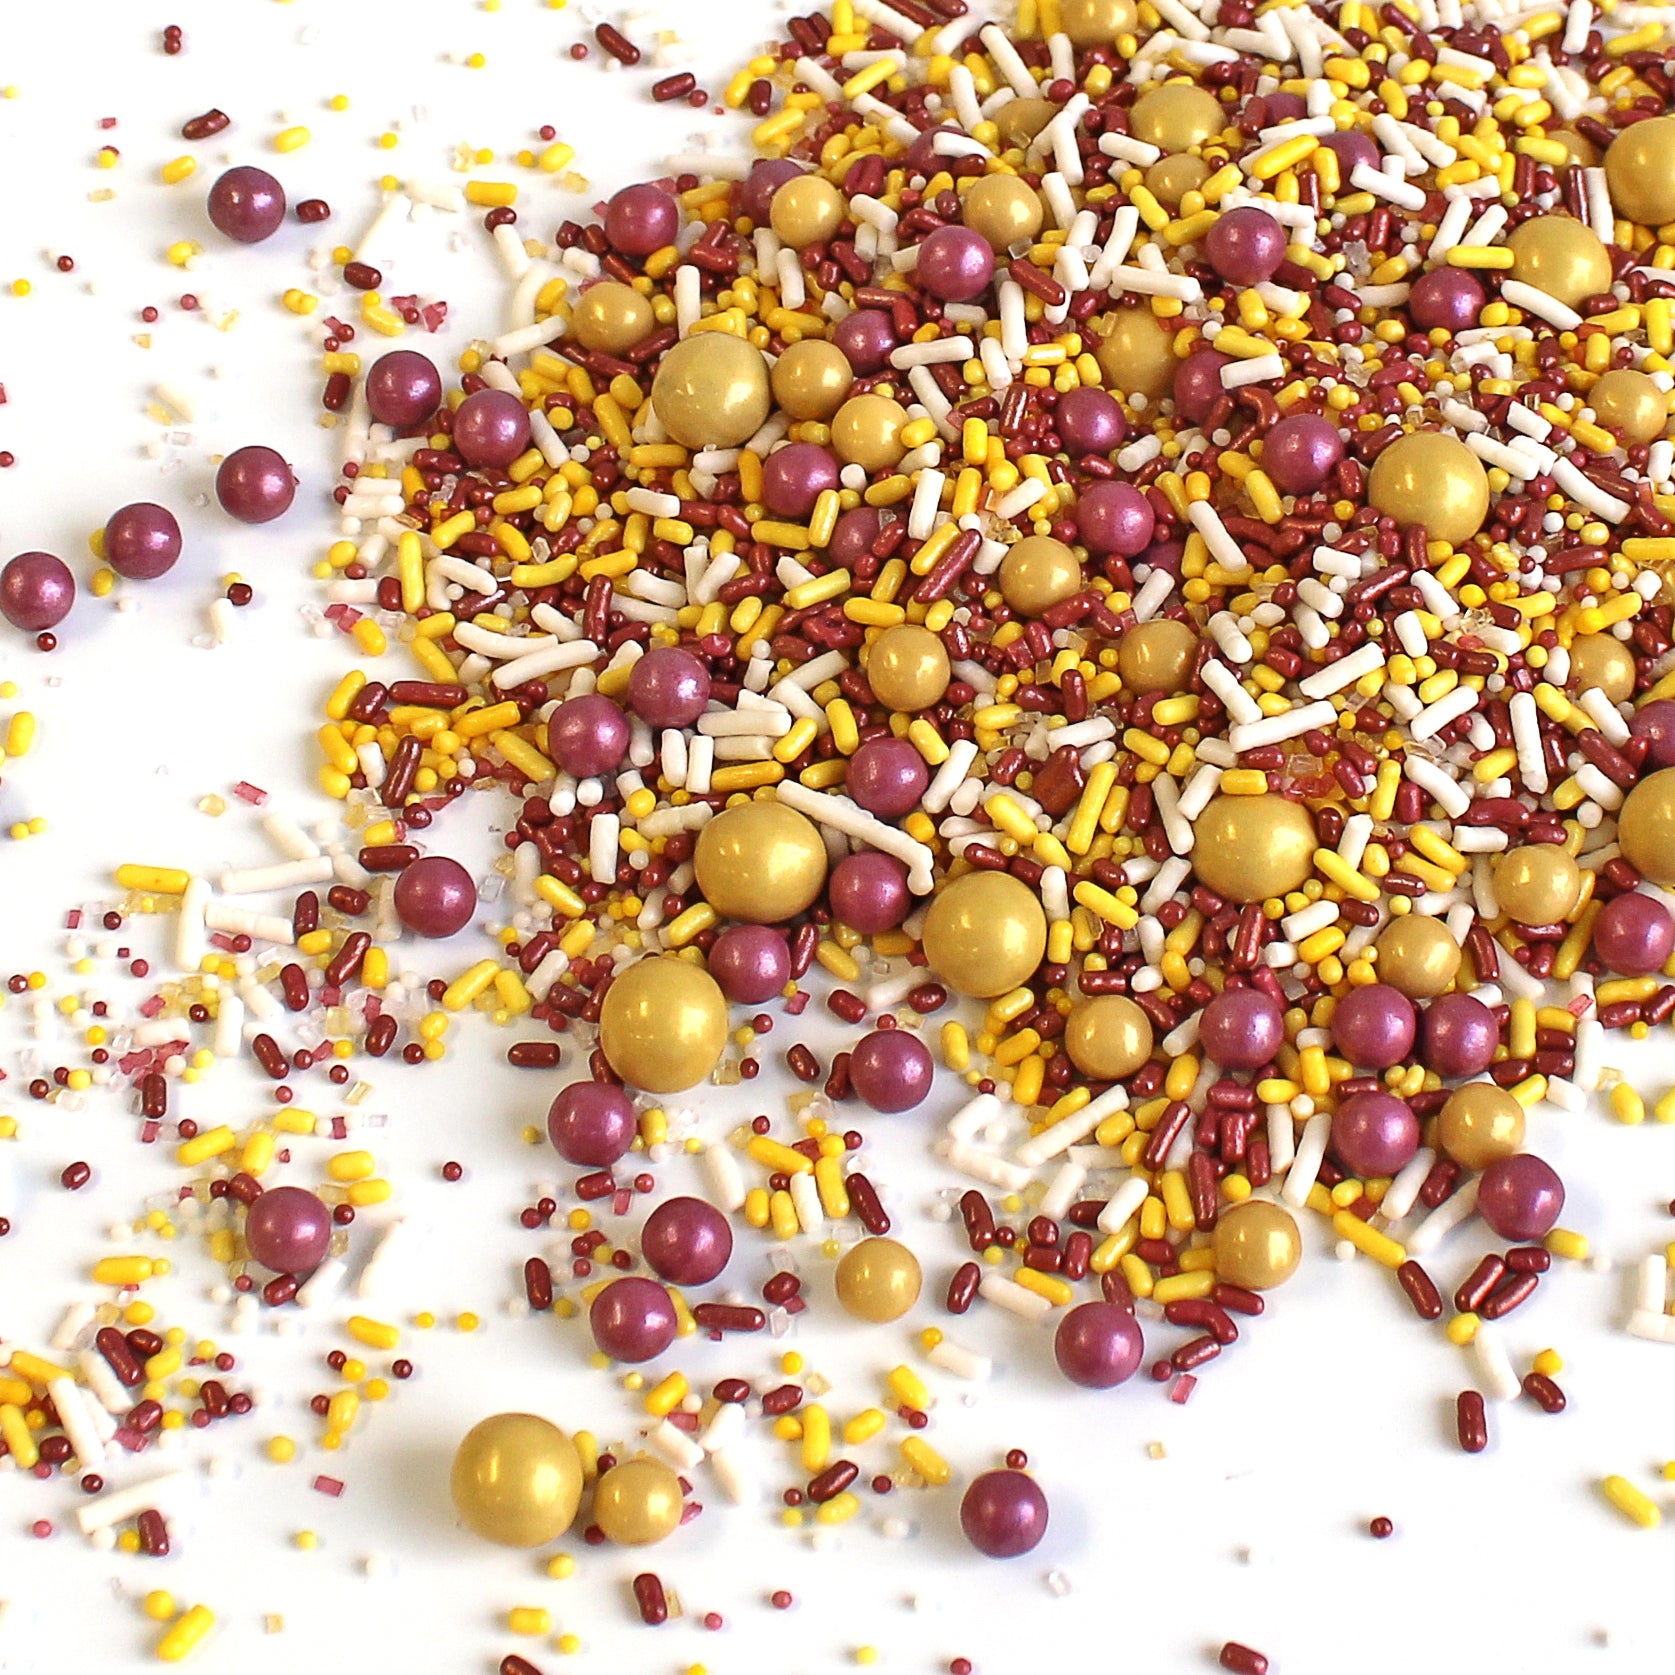 Amazon.com: Solid Burgundy Sprinkles| Sprinkle Pop Jimmies Sprinkles|  Perfect For Cake Decorating| Topping Cupcakes and Decorating Holiday  Treats, 4oz : Grocery & Gourmet Food